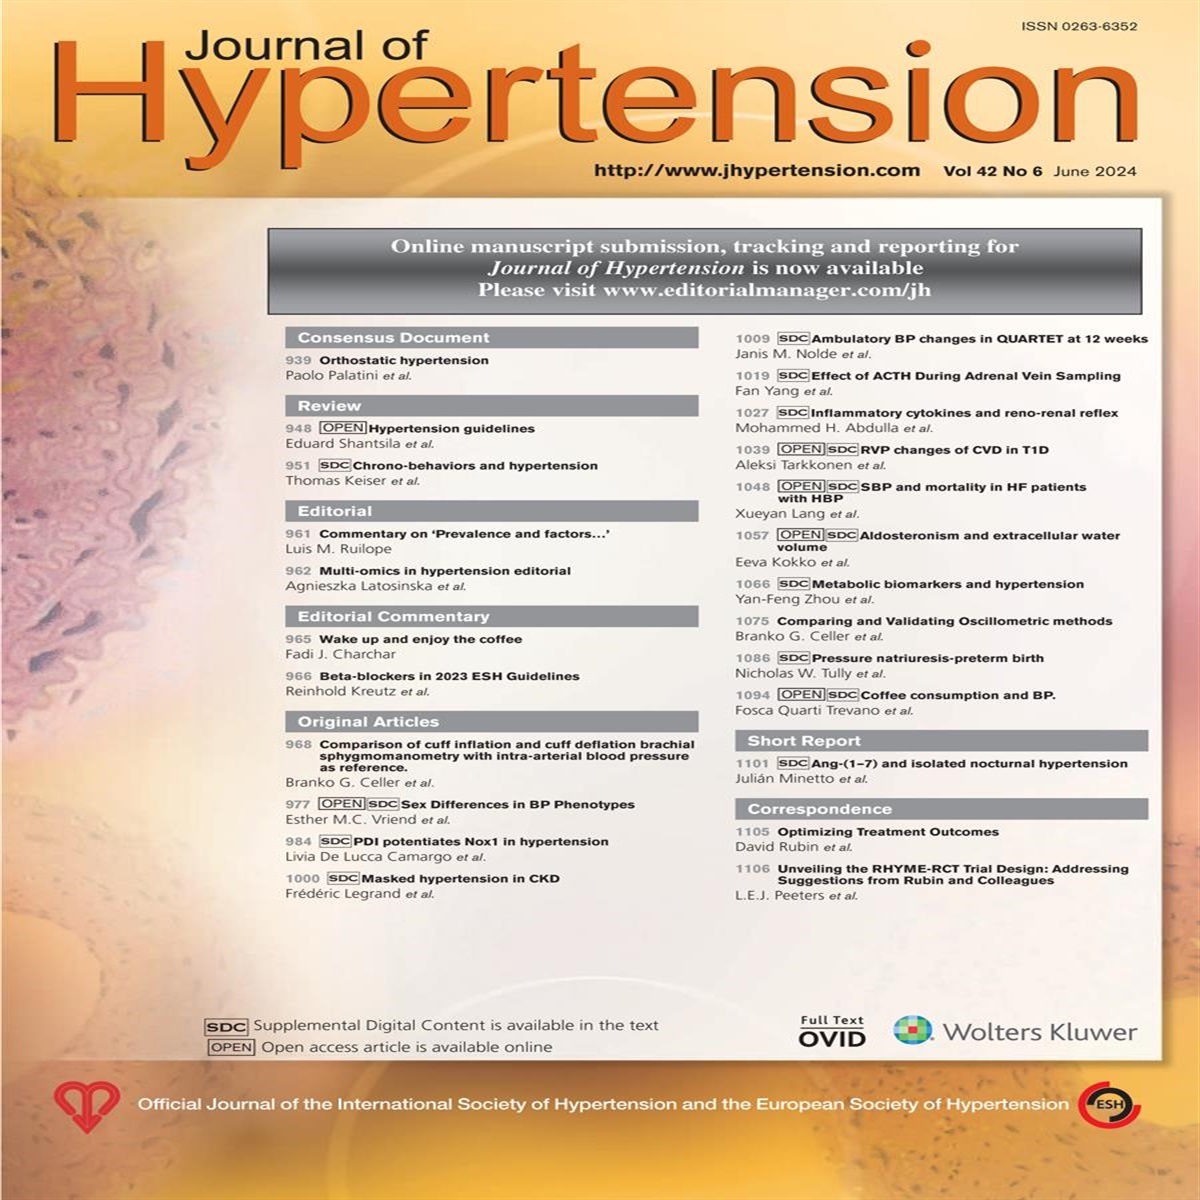 Beta-blocker bashing and downgrading in hypertension management: a fashionable trend representing a matter of concern